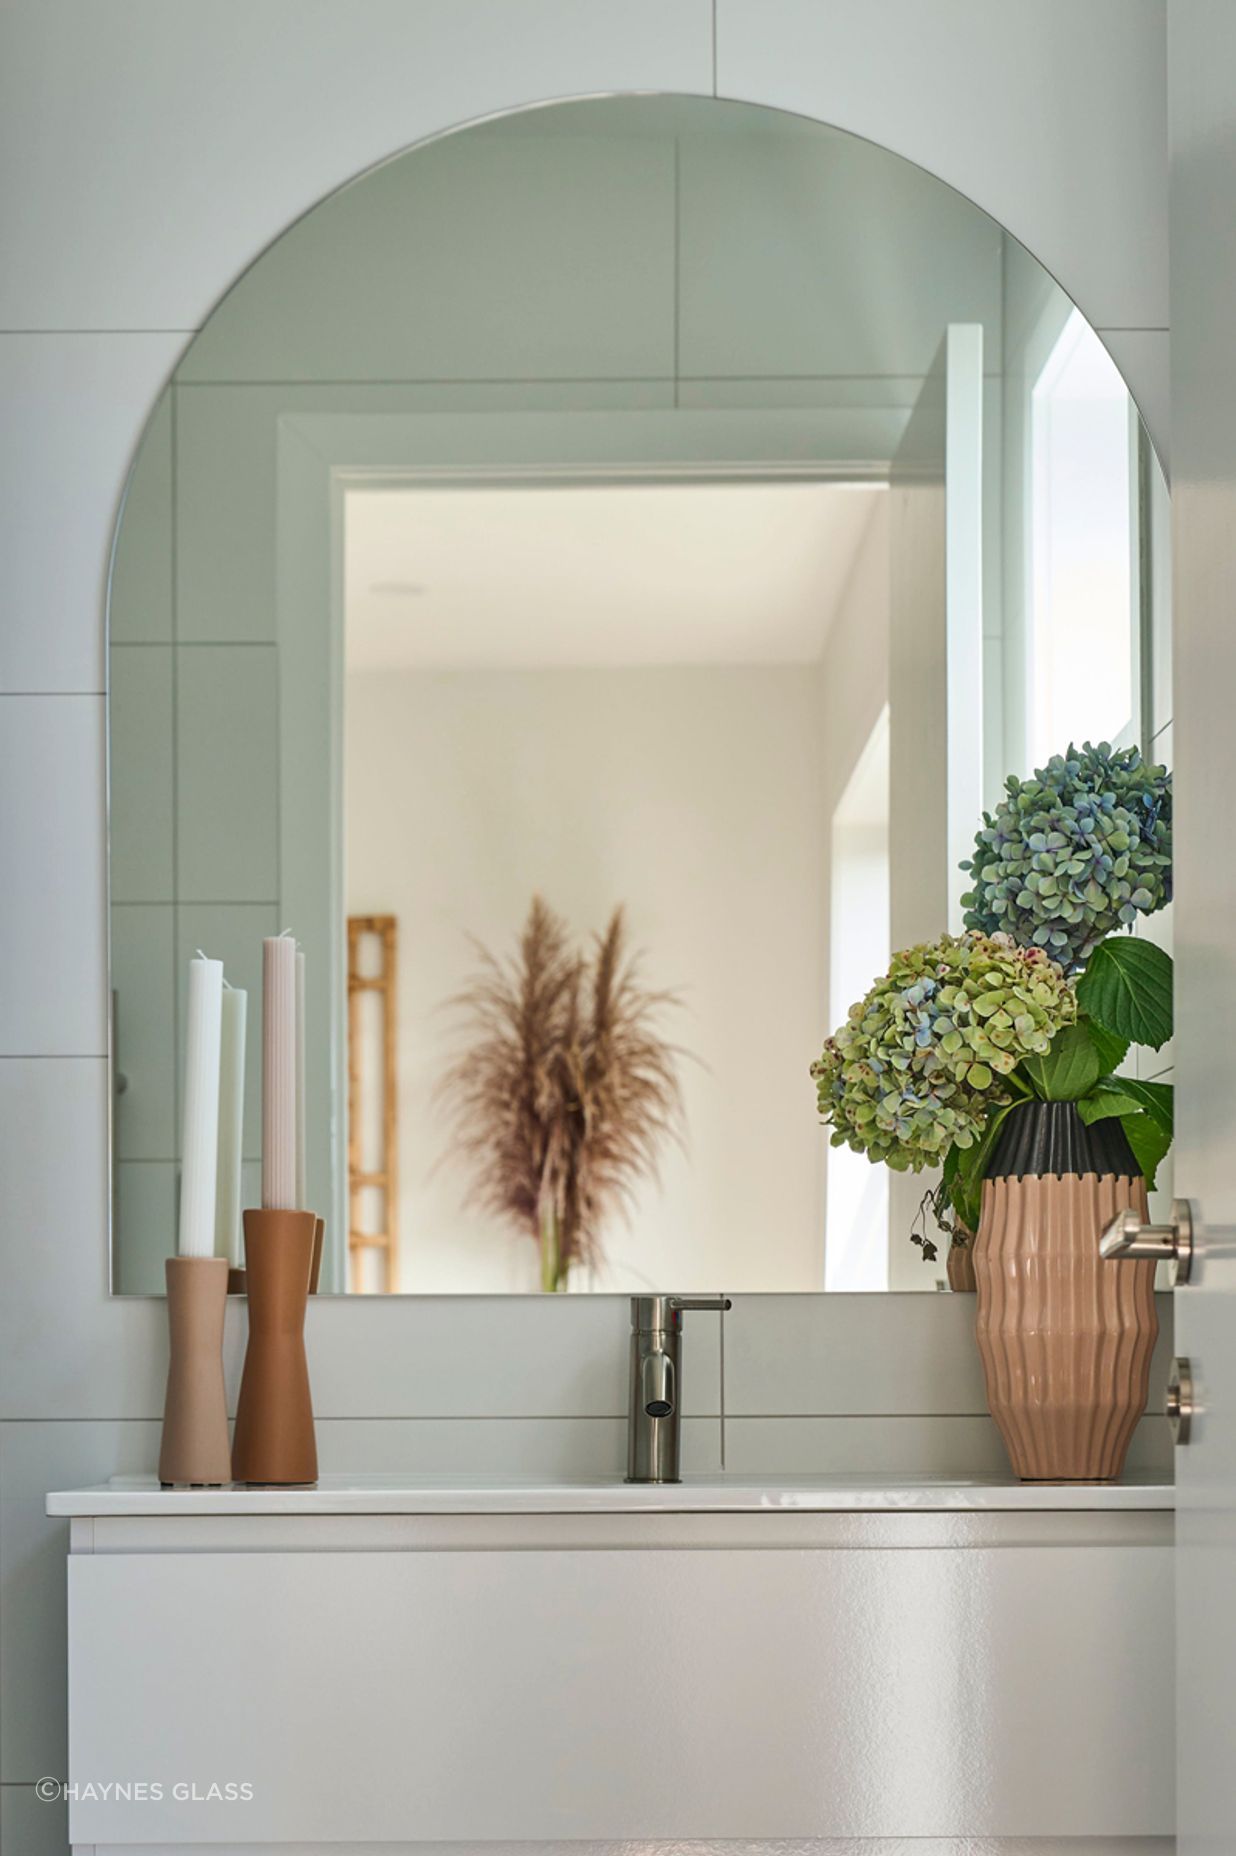 This custom arch mirror is the perfect addition to this small bathroom.